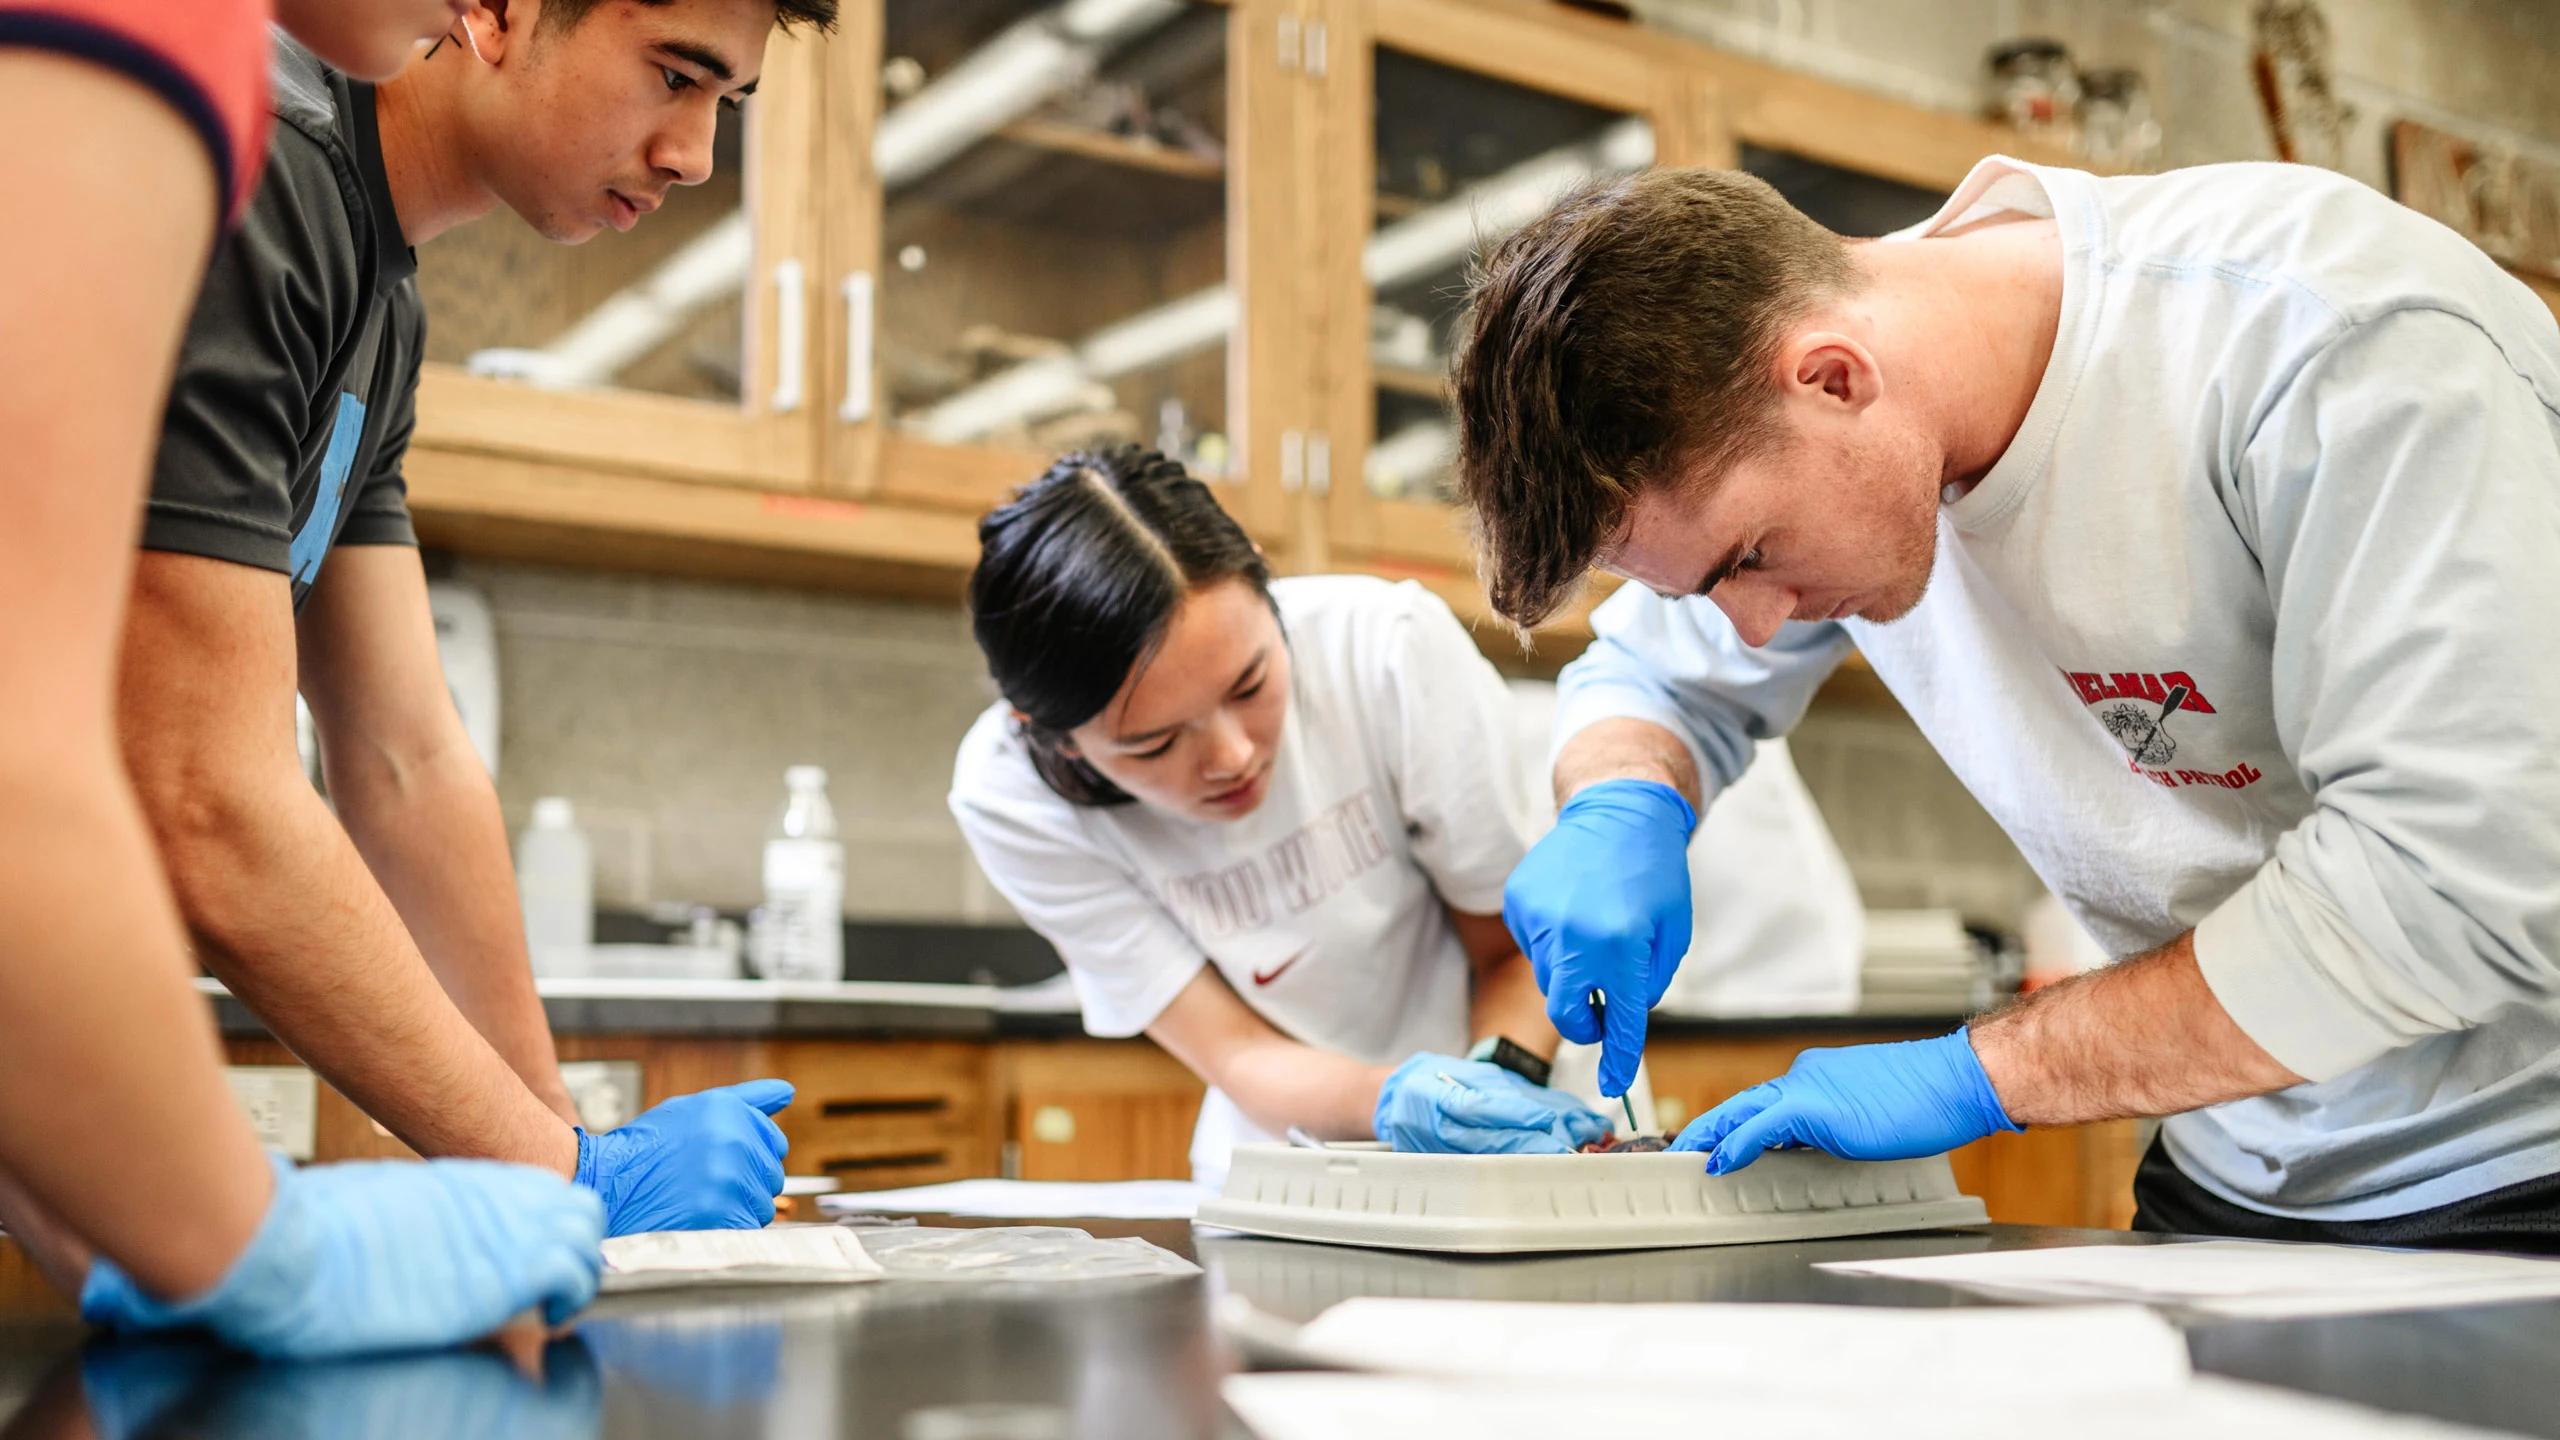 Biology students work on a dissection in the lab.